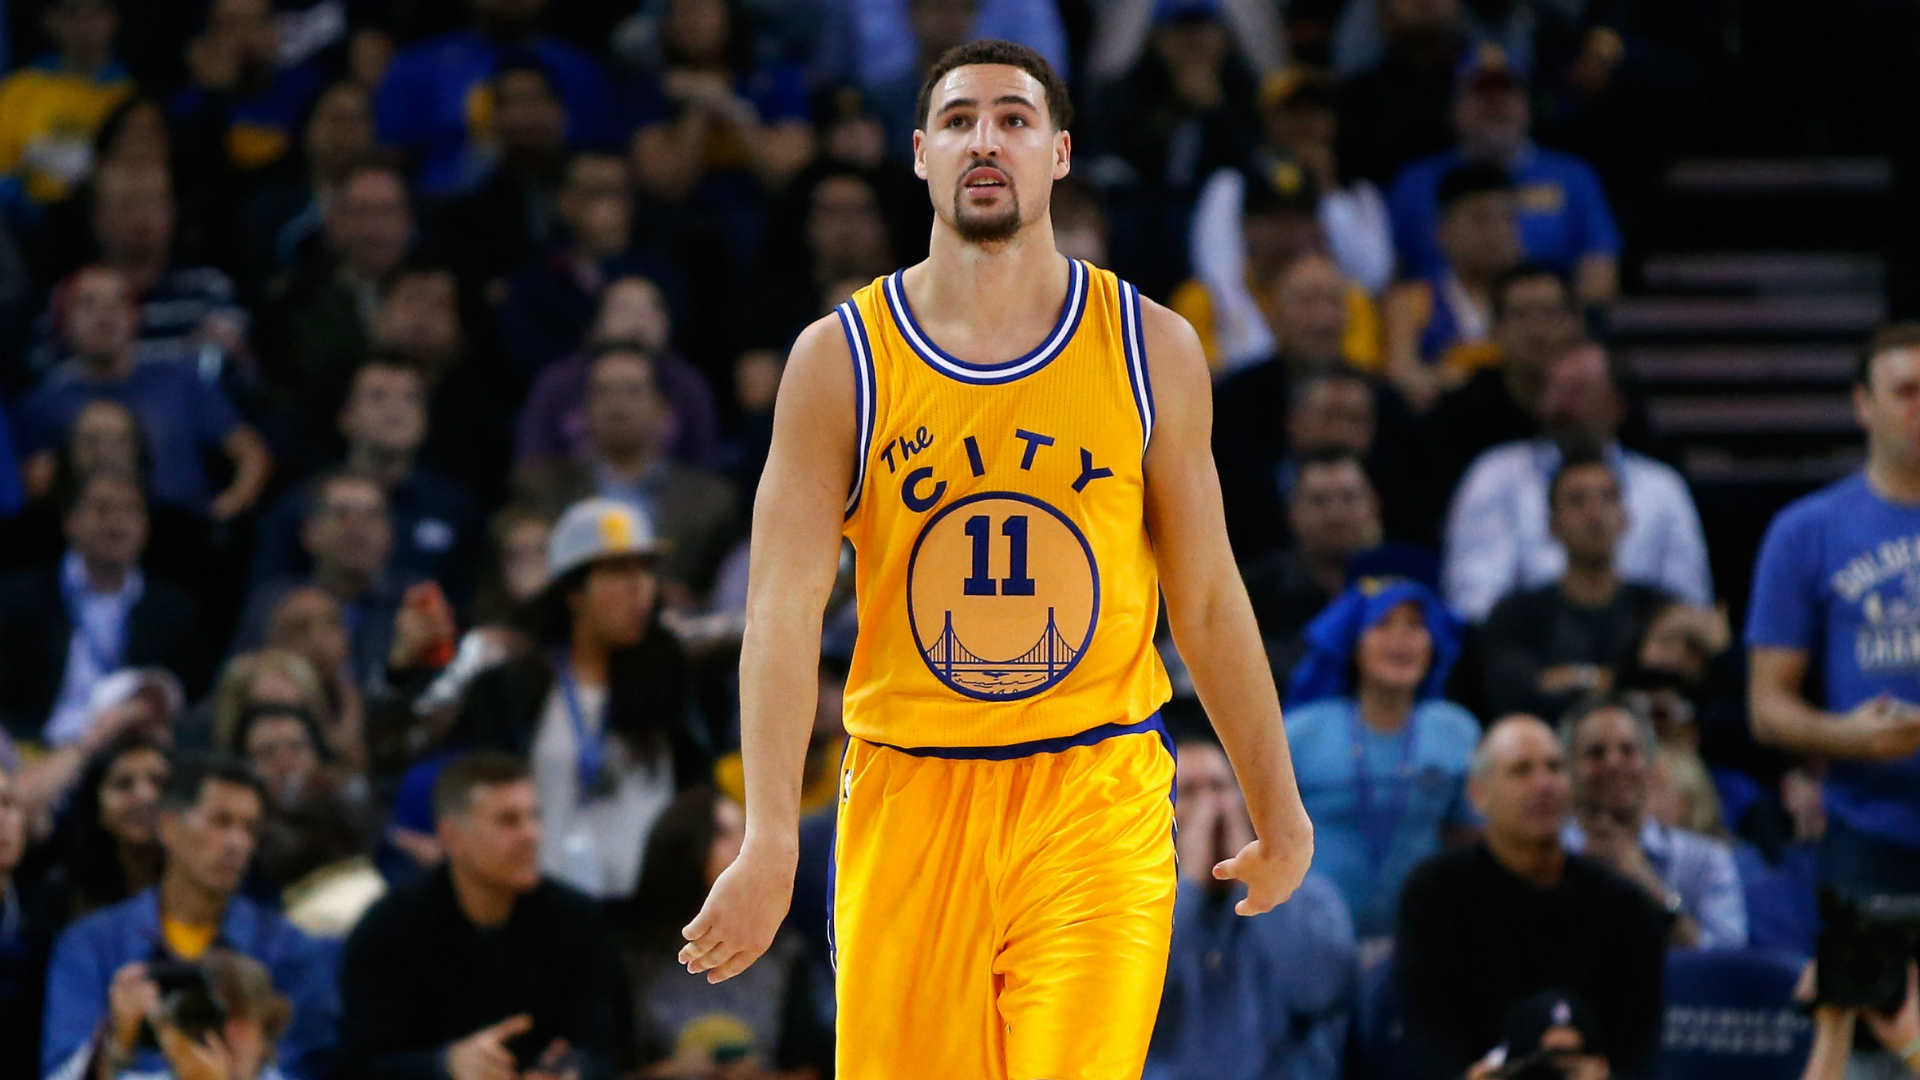 1920x1080 Klay Thompson Wallpapers High Resolution and Quality Download Klay Thompson  Stock Photos and Pictures | Getty Images ...